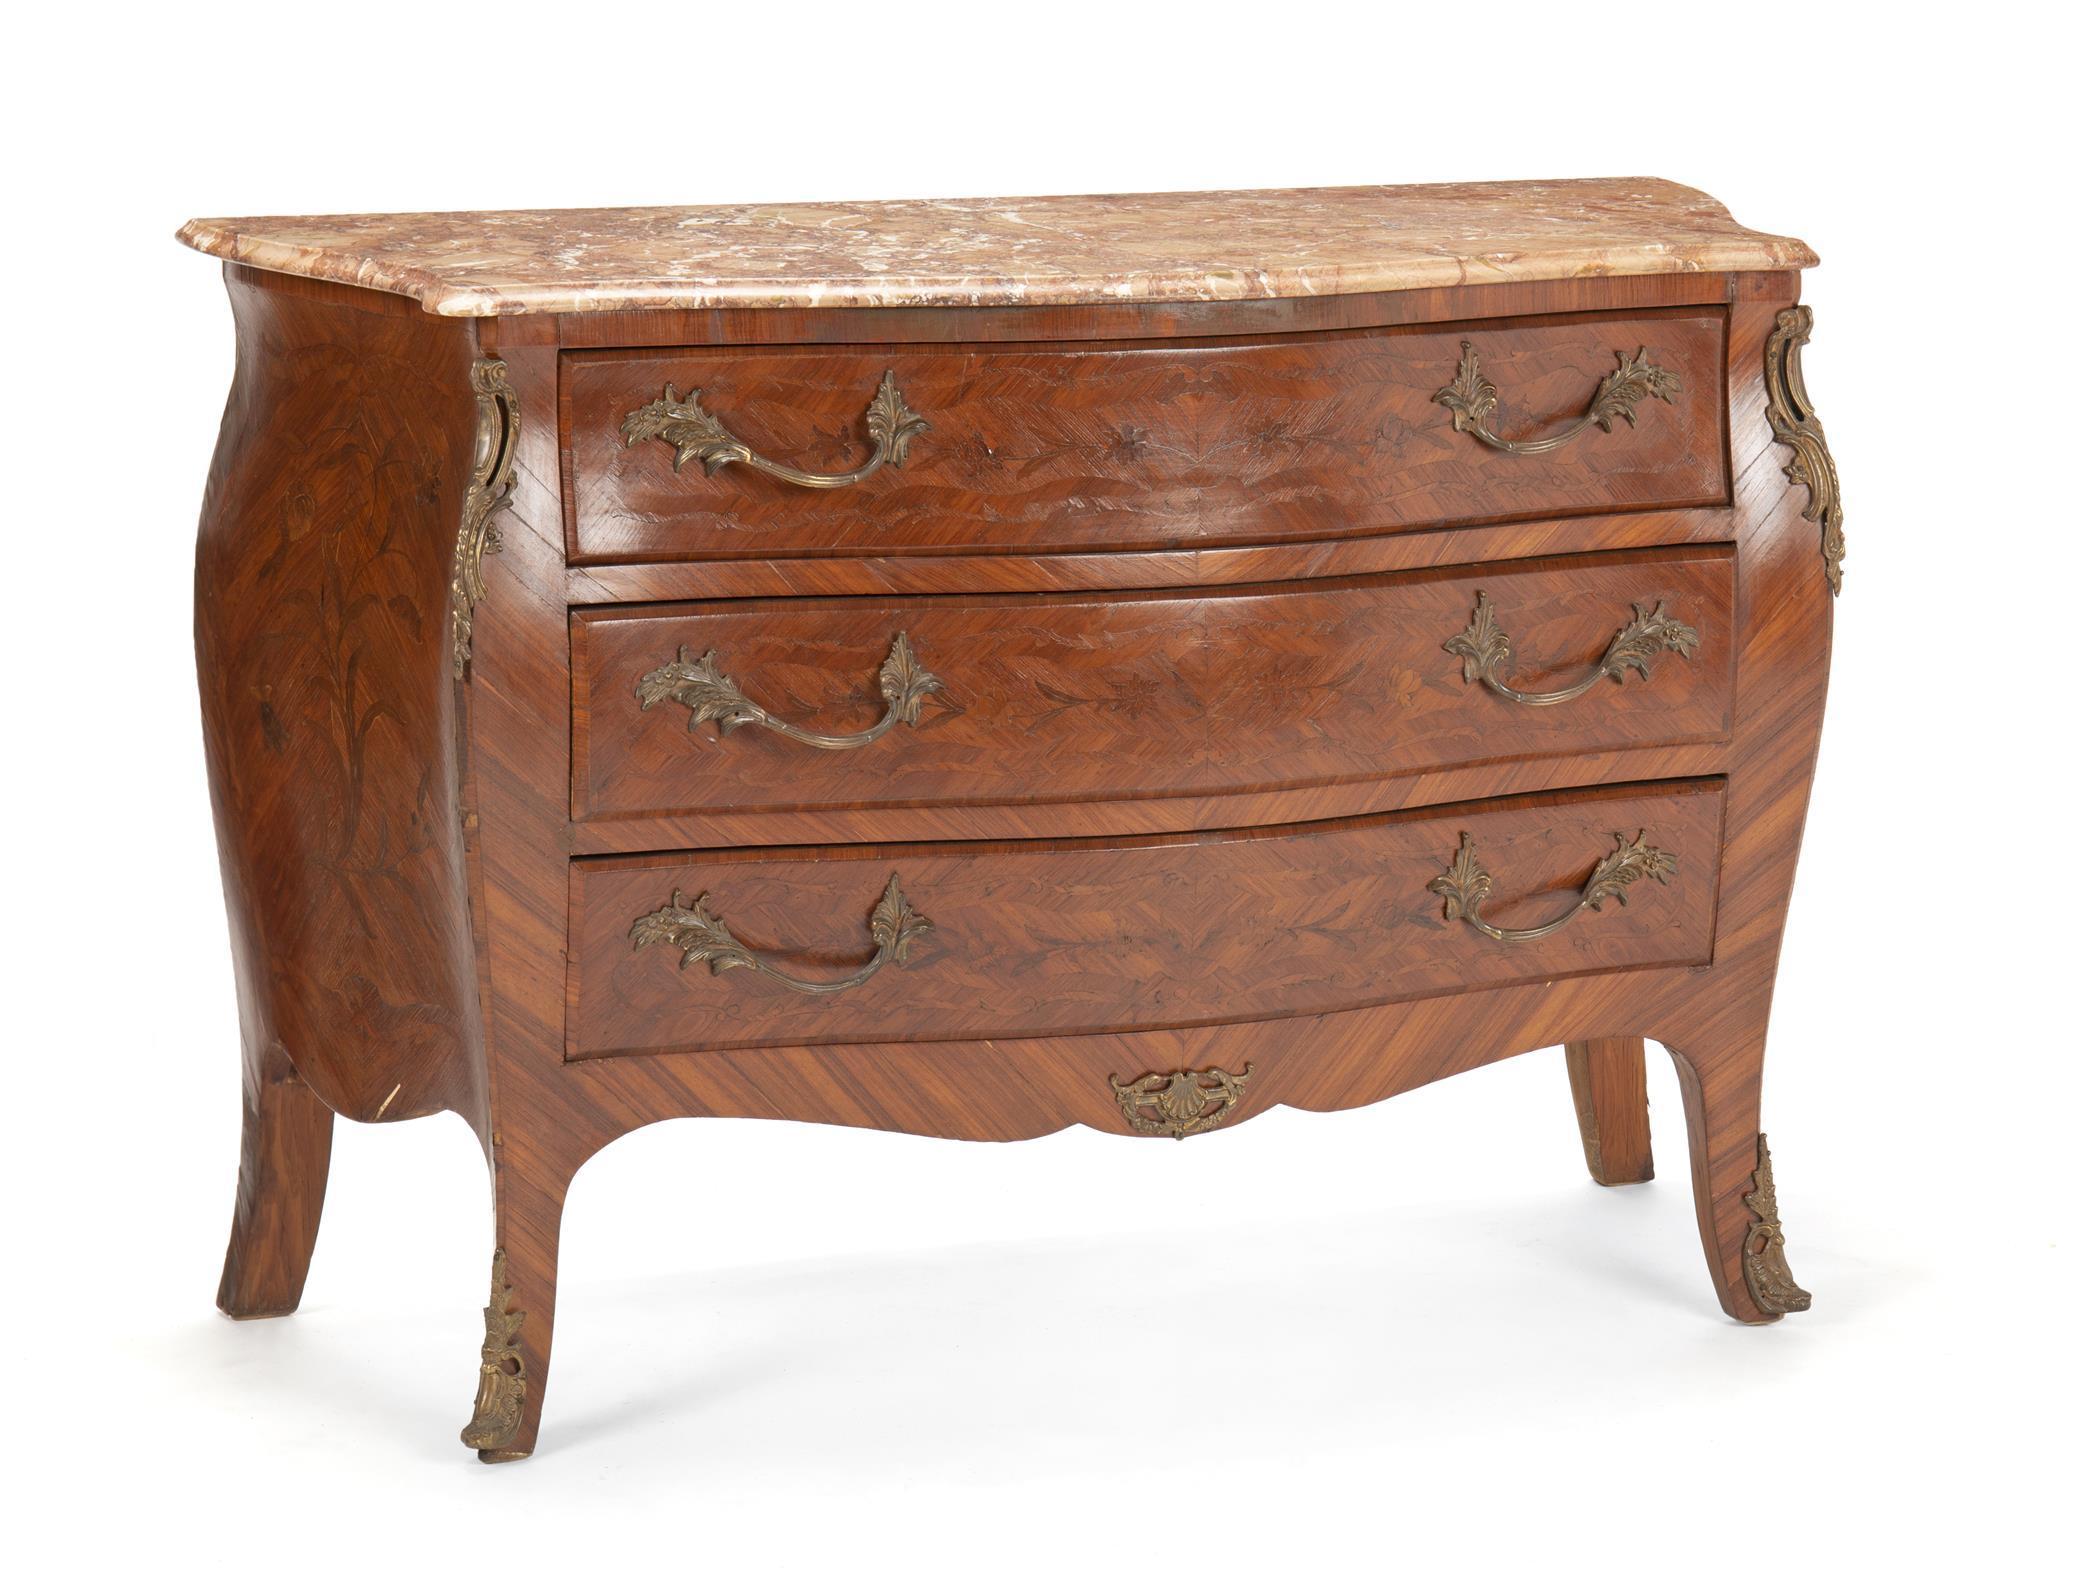 Lovely French Louis XV style gilt bronze mounted commode. 
Late 19th-early 20th century.
Serpentine-fronted mottled marble top, above a veneered commode fitted with three long drawers mounted with foliate-inspired handles, the sides exhibiting a